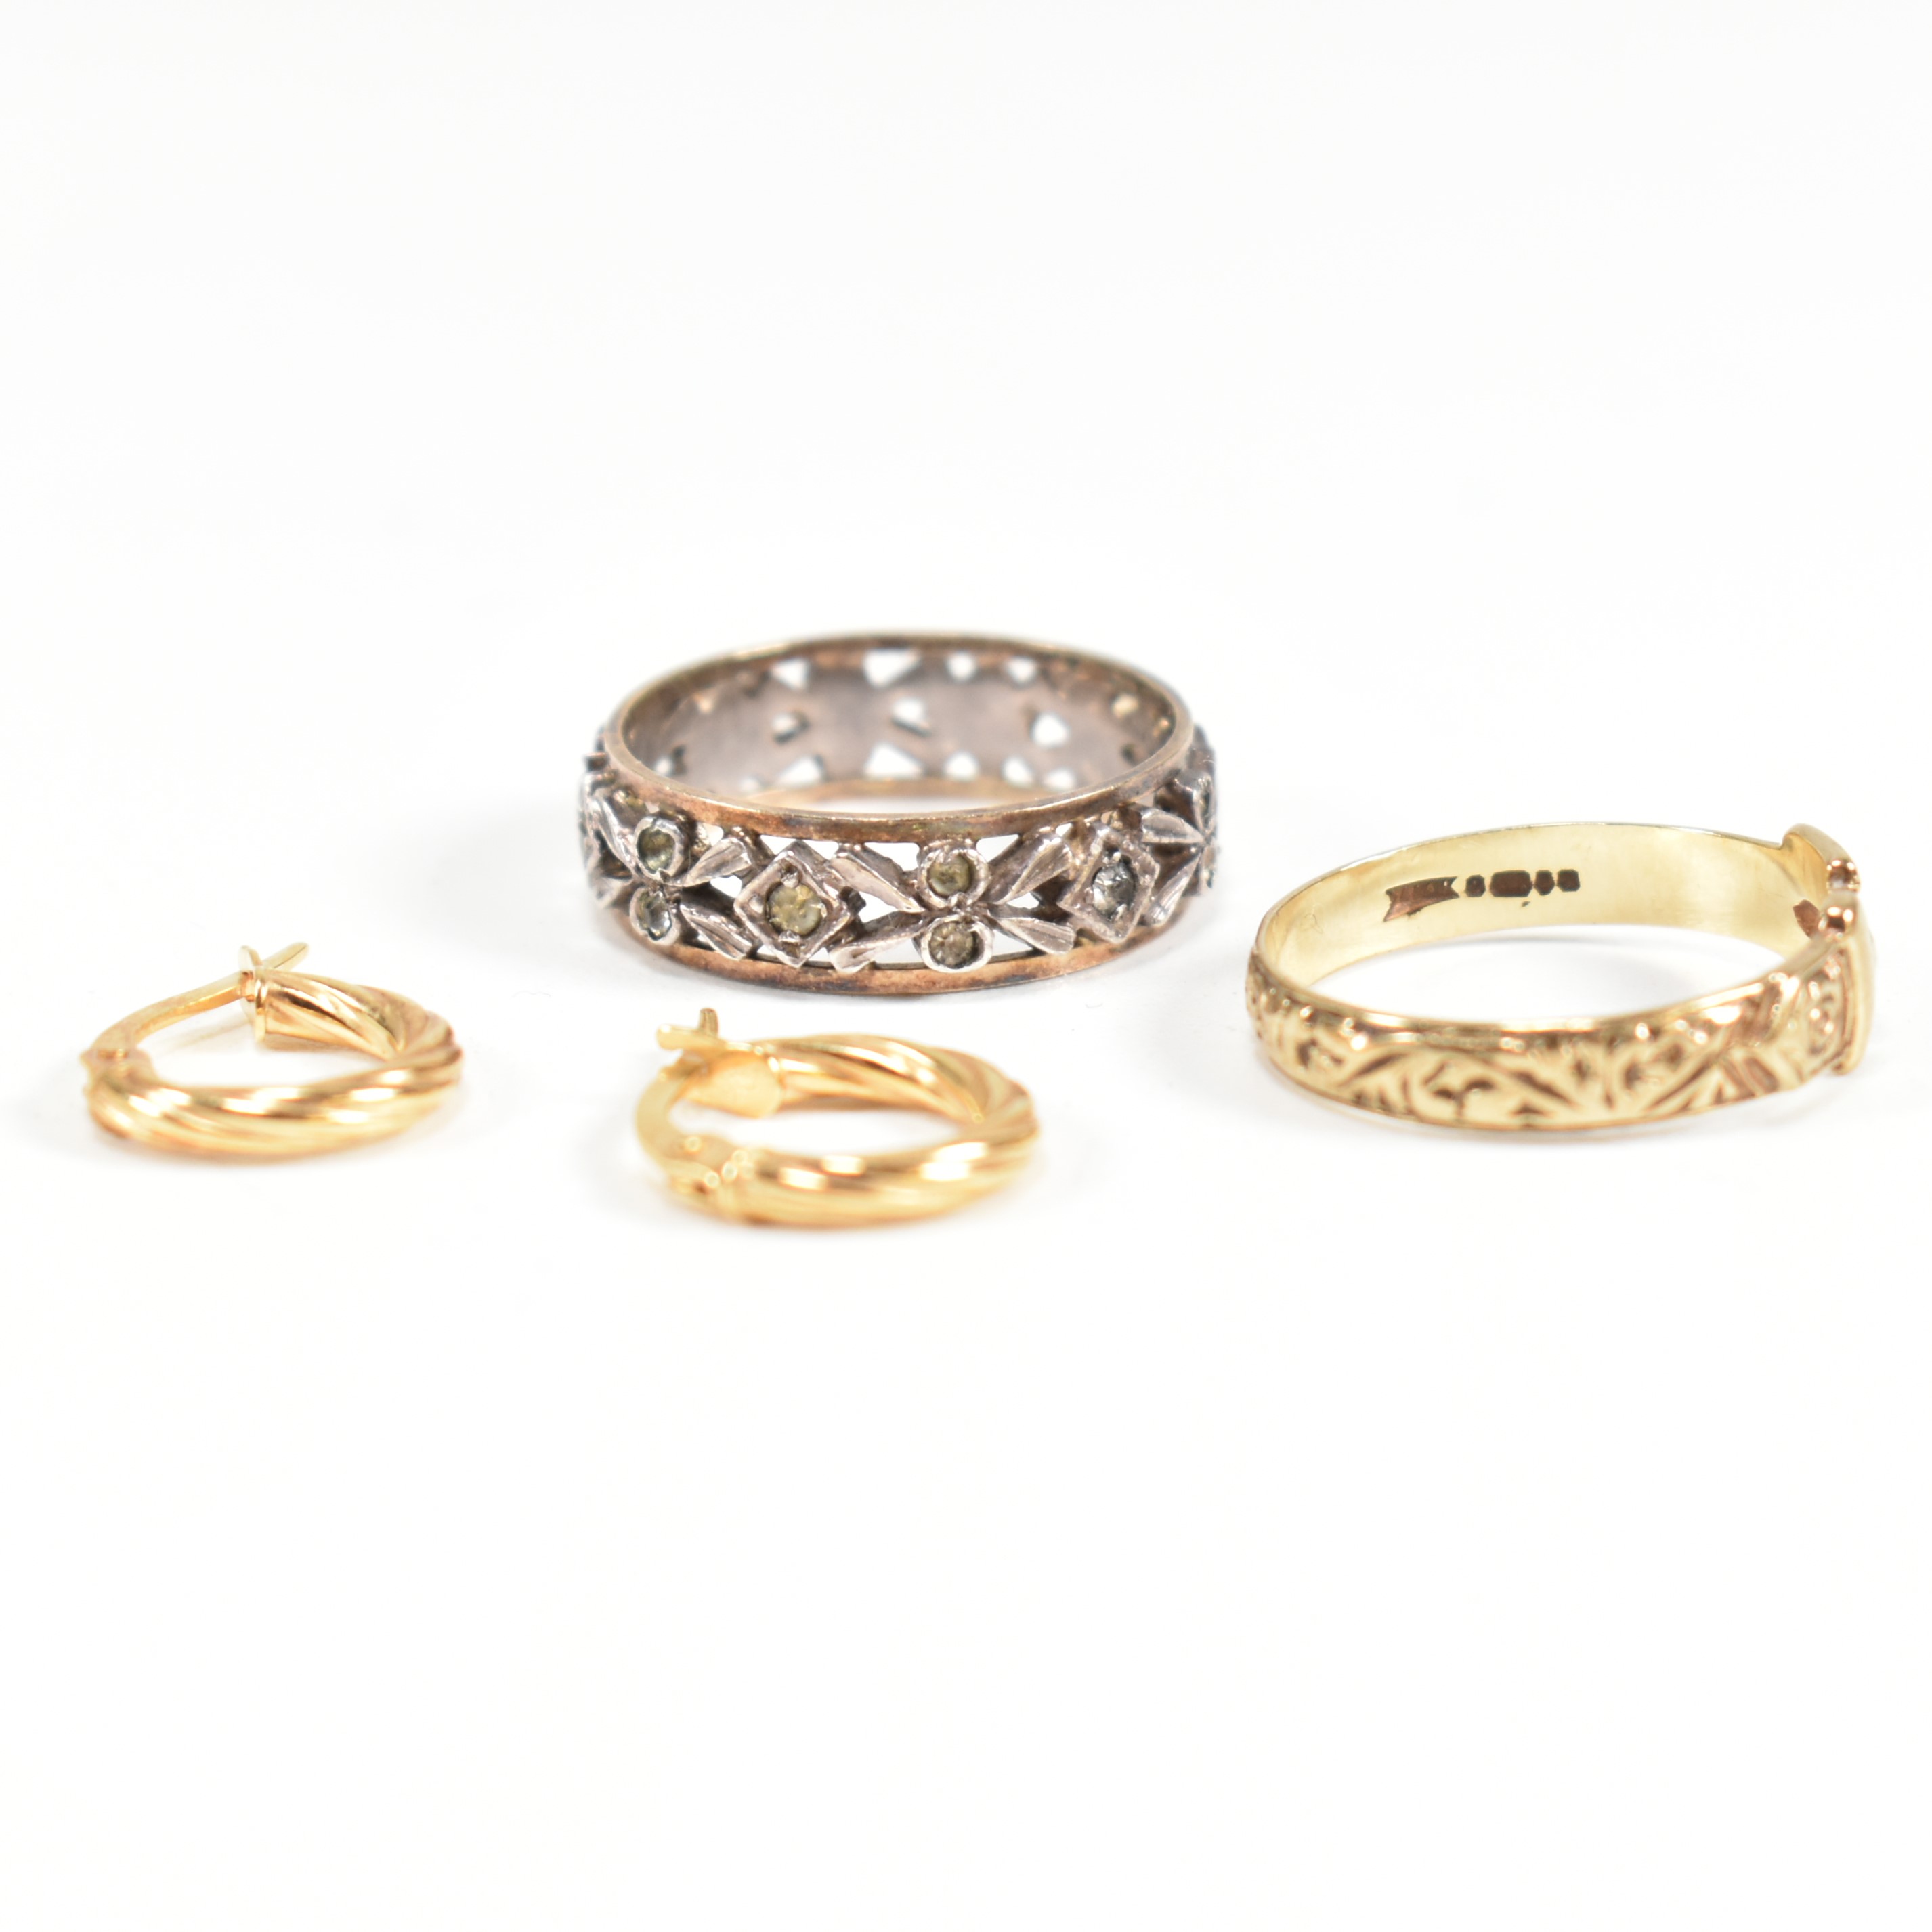 COLLECTION OF 9CT GOLD JEWELLERY INCLUDING GOLD & SILVER ETERNITY RING - Image 8 of 13